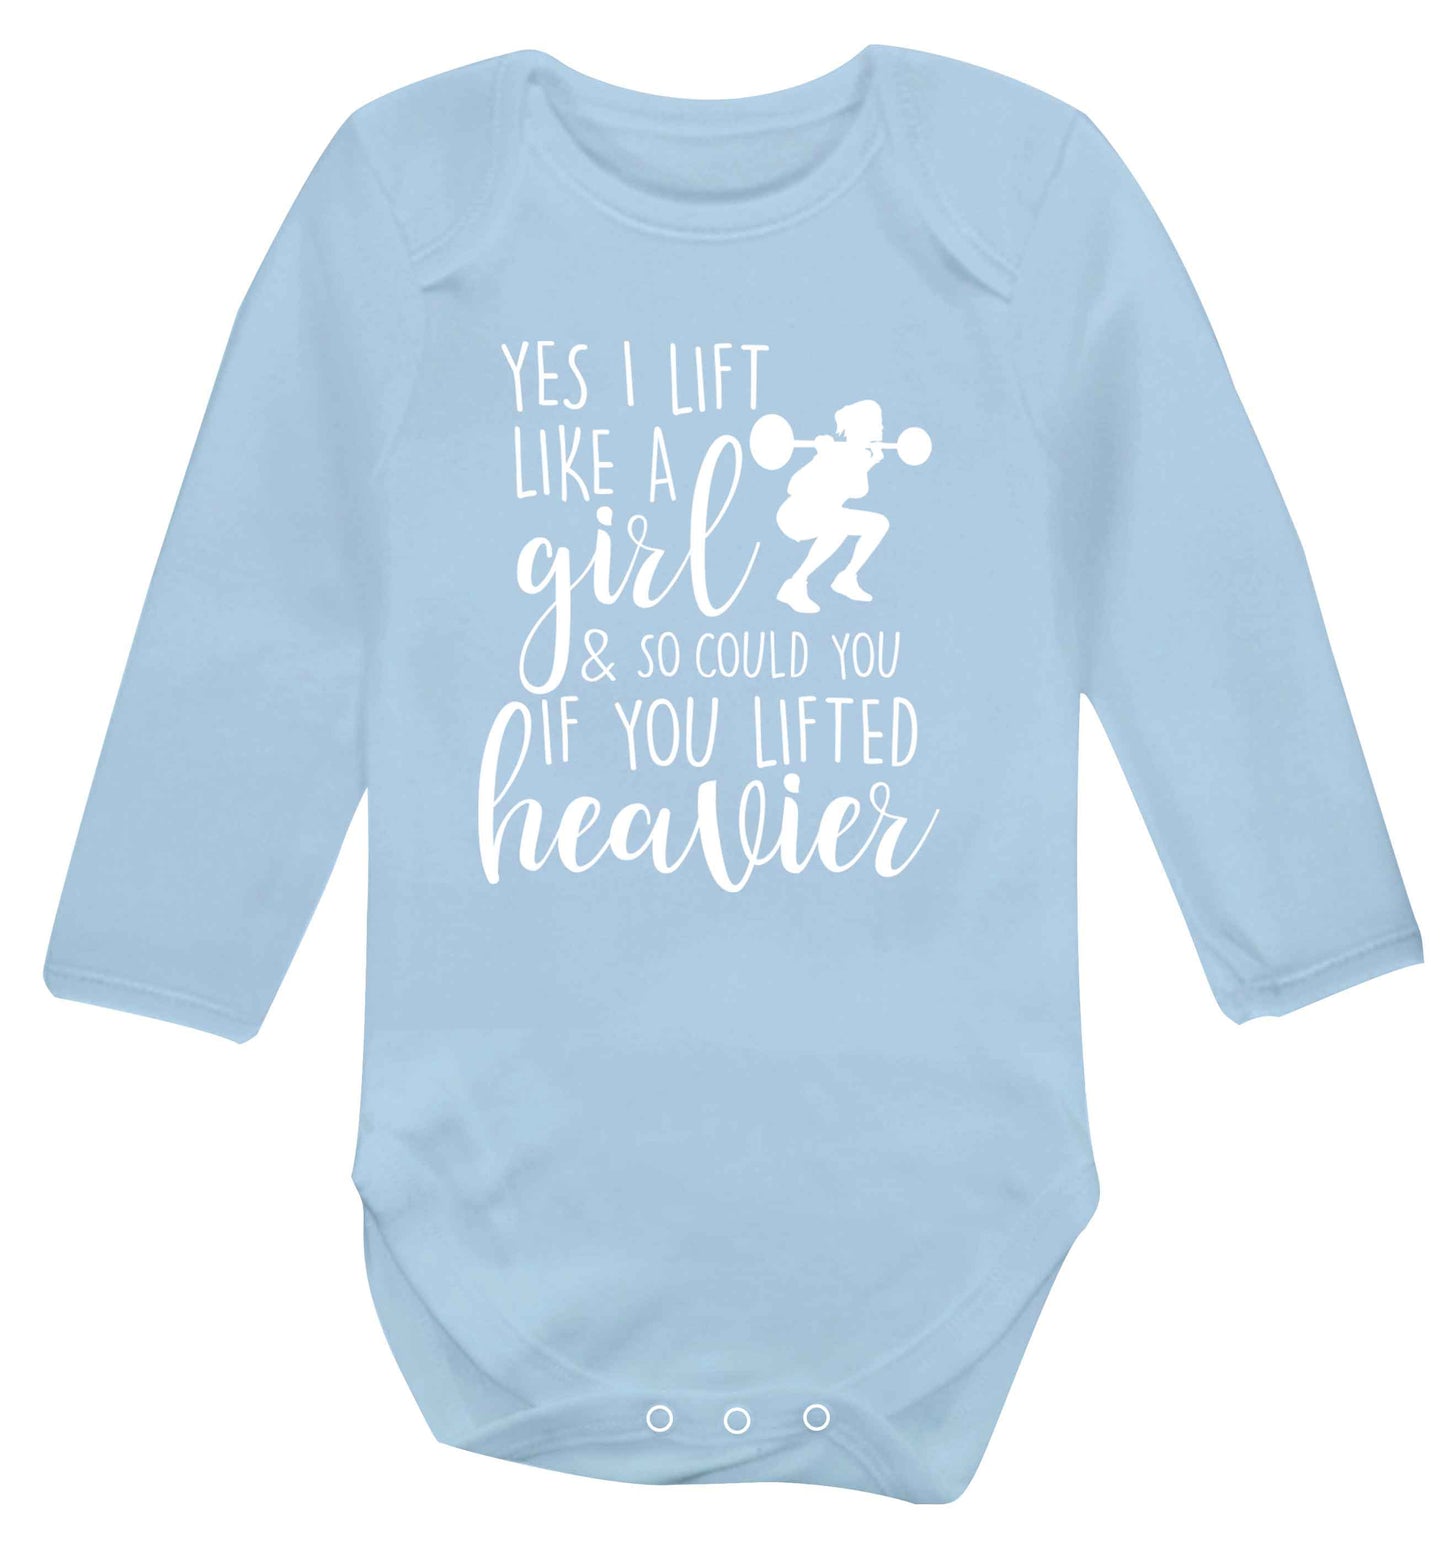 Yes I lift like a girl and so could you if you lifted heavier Baby Vest long sleeved pale blue 6-12 months